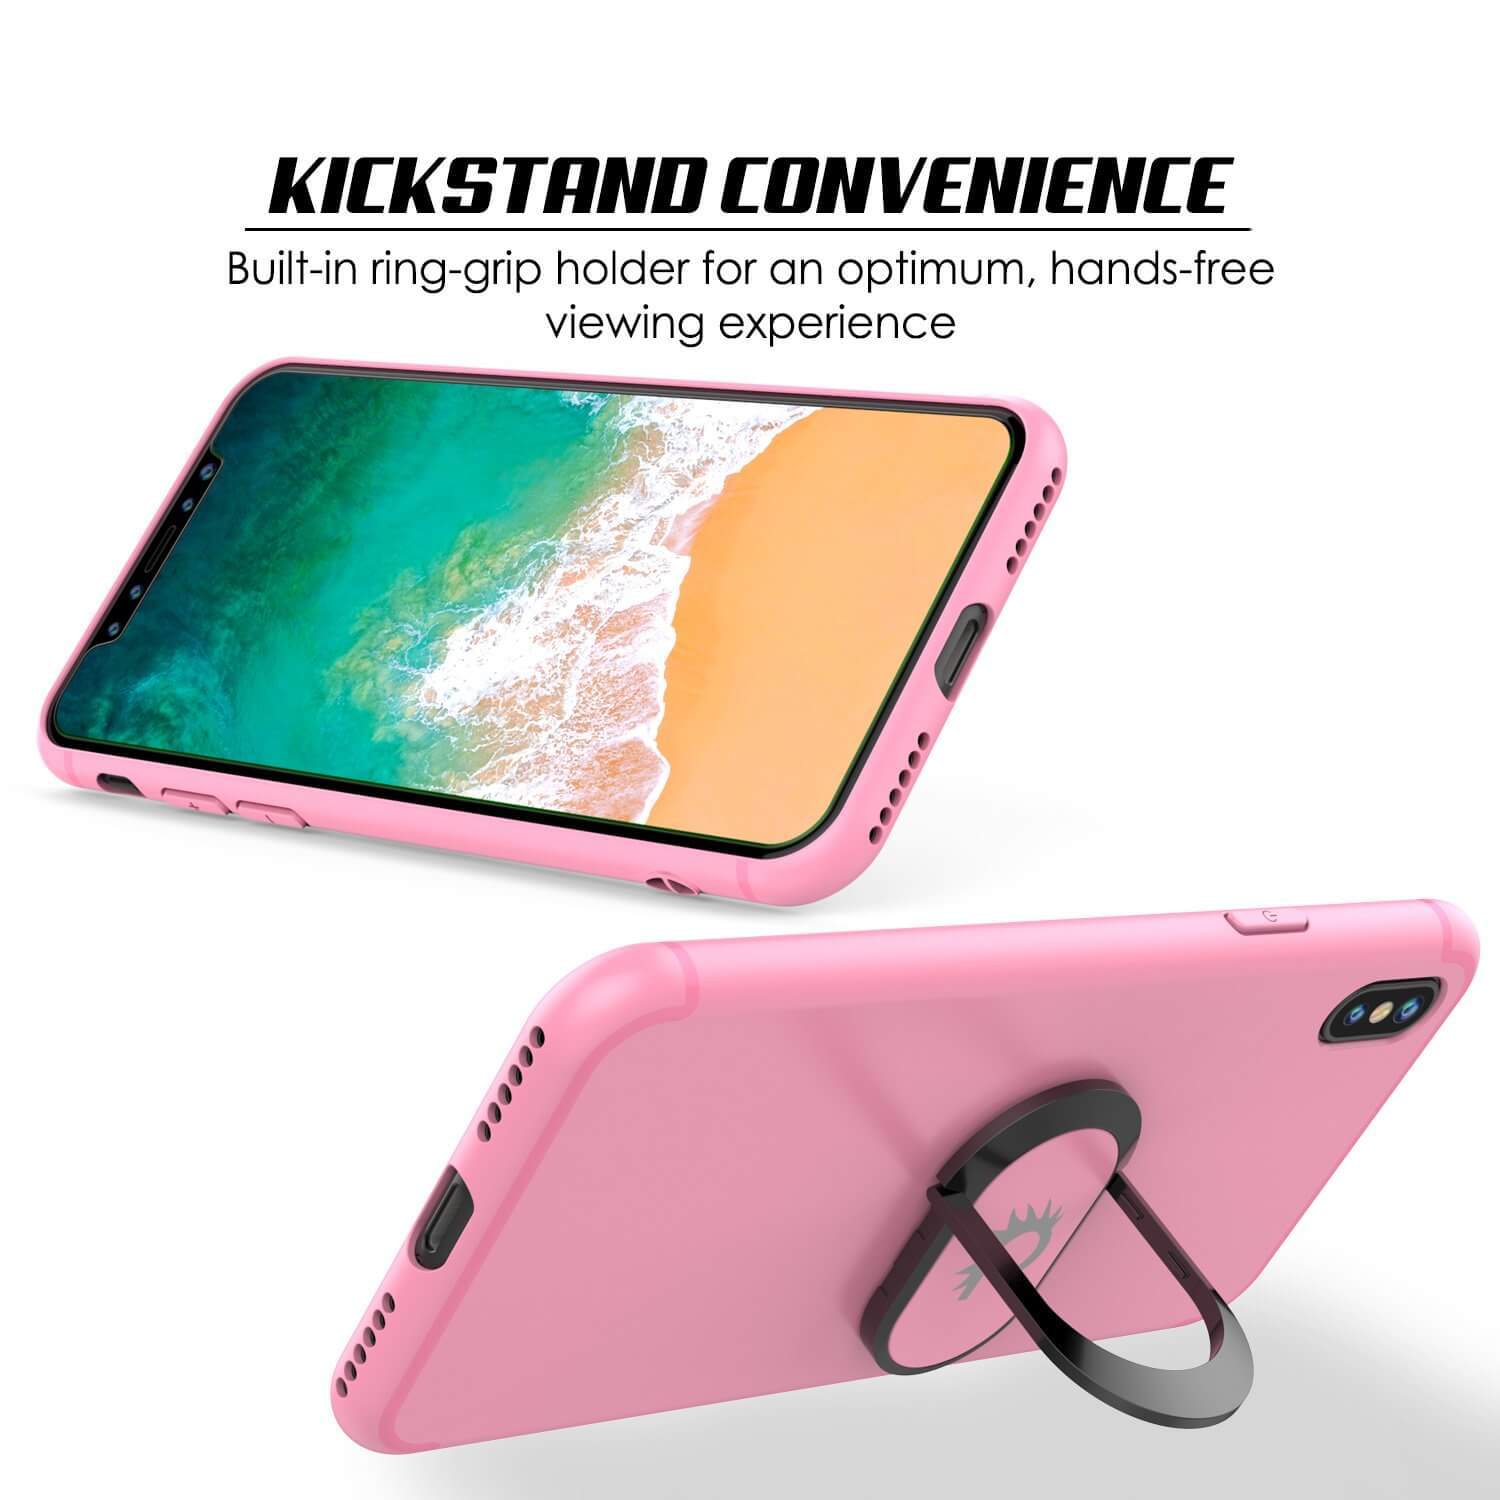 iPhone XS Case, Punkcase Magnetix Protective TPU Cover W/ Kickstand, Tempered Glass Screen Protector [Pink]